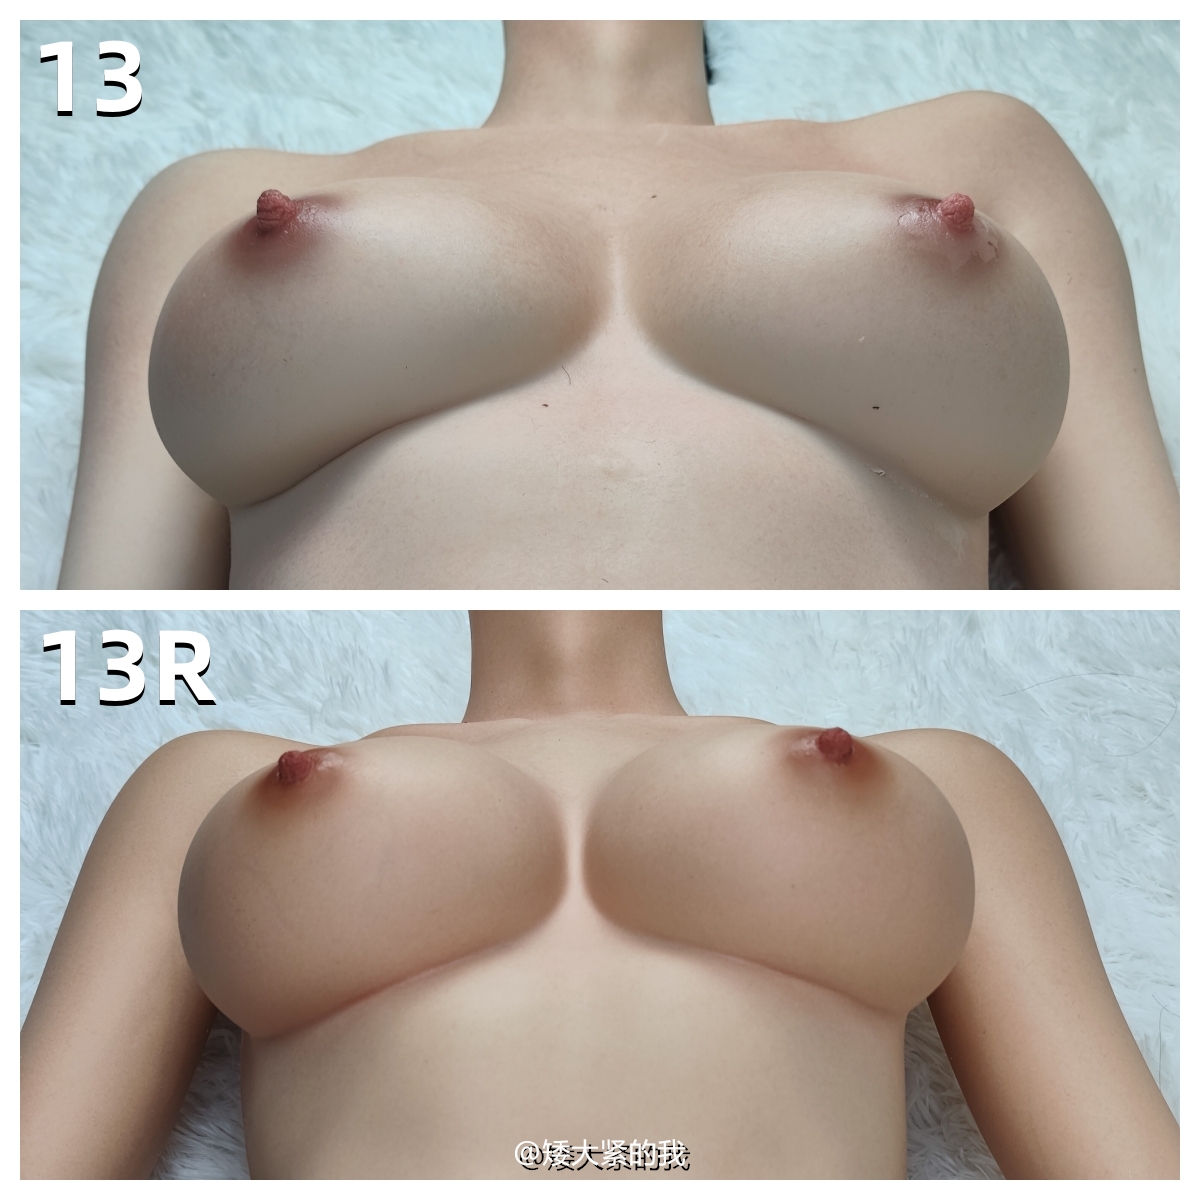 Gynoid Doll RZR|Realistic Silicone Sex Doll|Light Shooting|Head Sculpture|Head Carving|Breast Shape|Lisa|Lori|13R|Doll Skin|Soft Breast